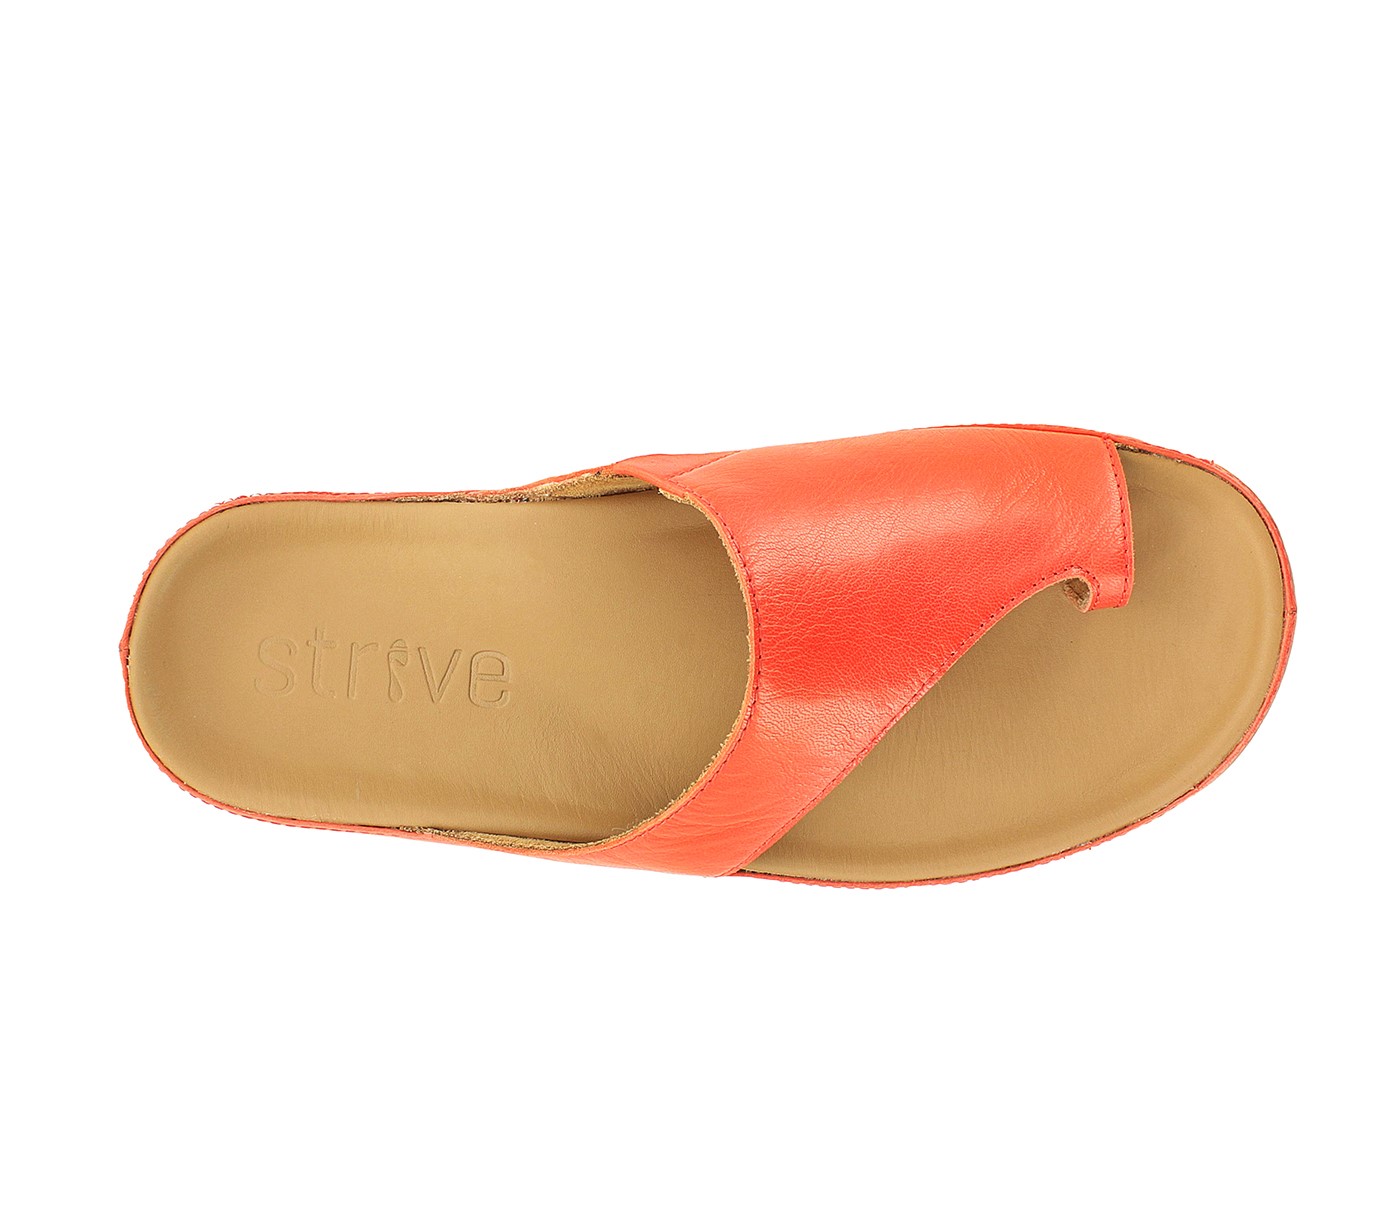 Strive Capri II - Women's Comfort Sandal with Arch Support - Free Shipping